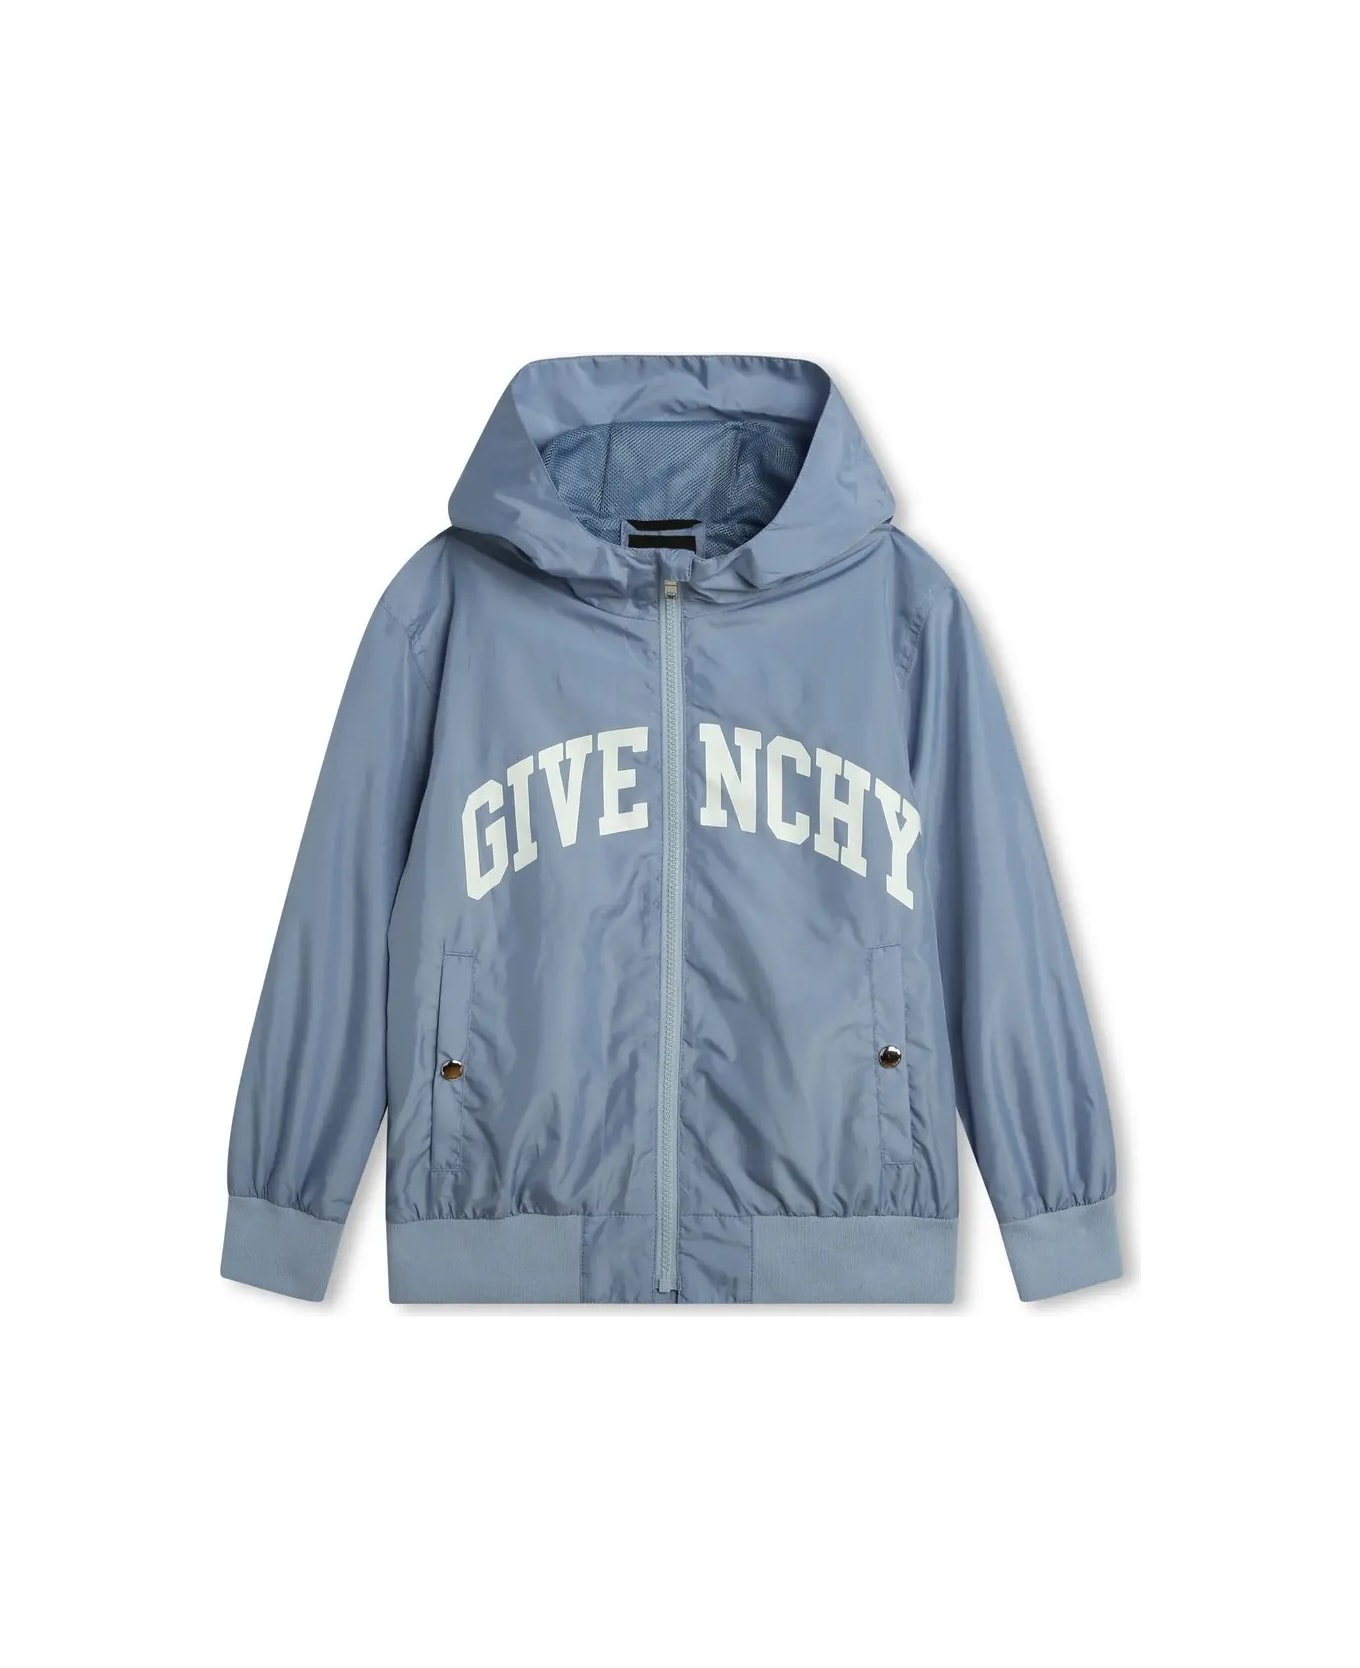 Givenchy Light Blue Givenchy Windbreaker With Zip And Hood - Blue コート＆ジャケット